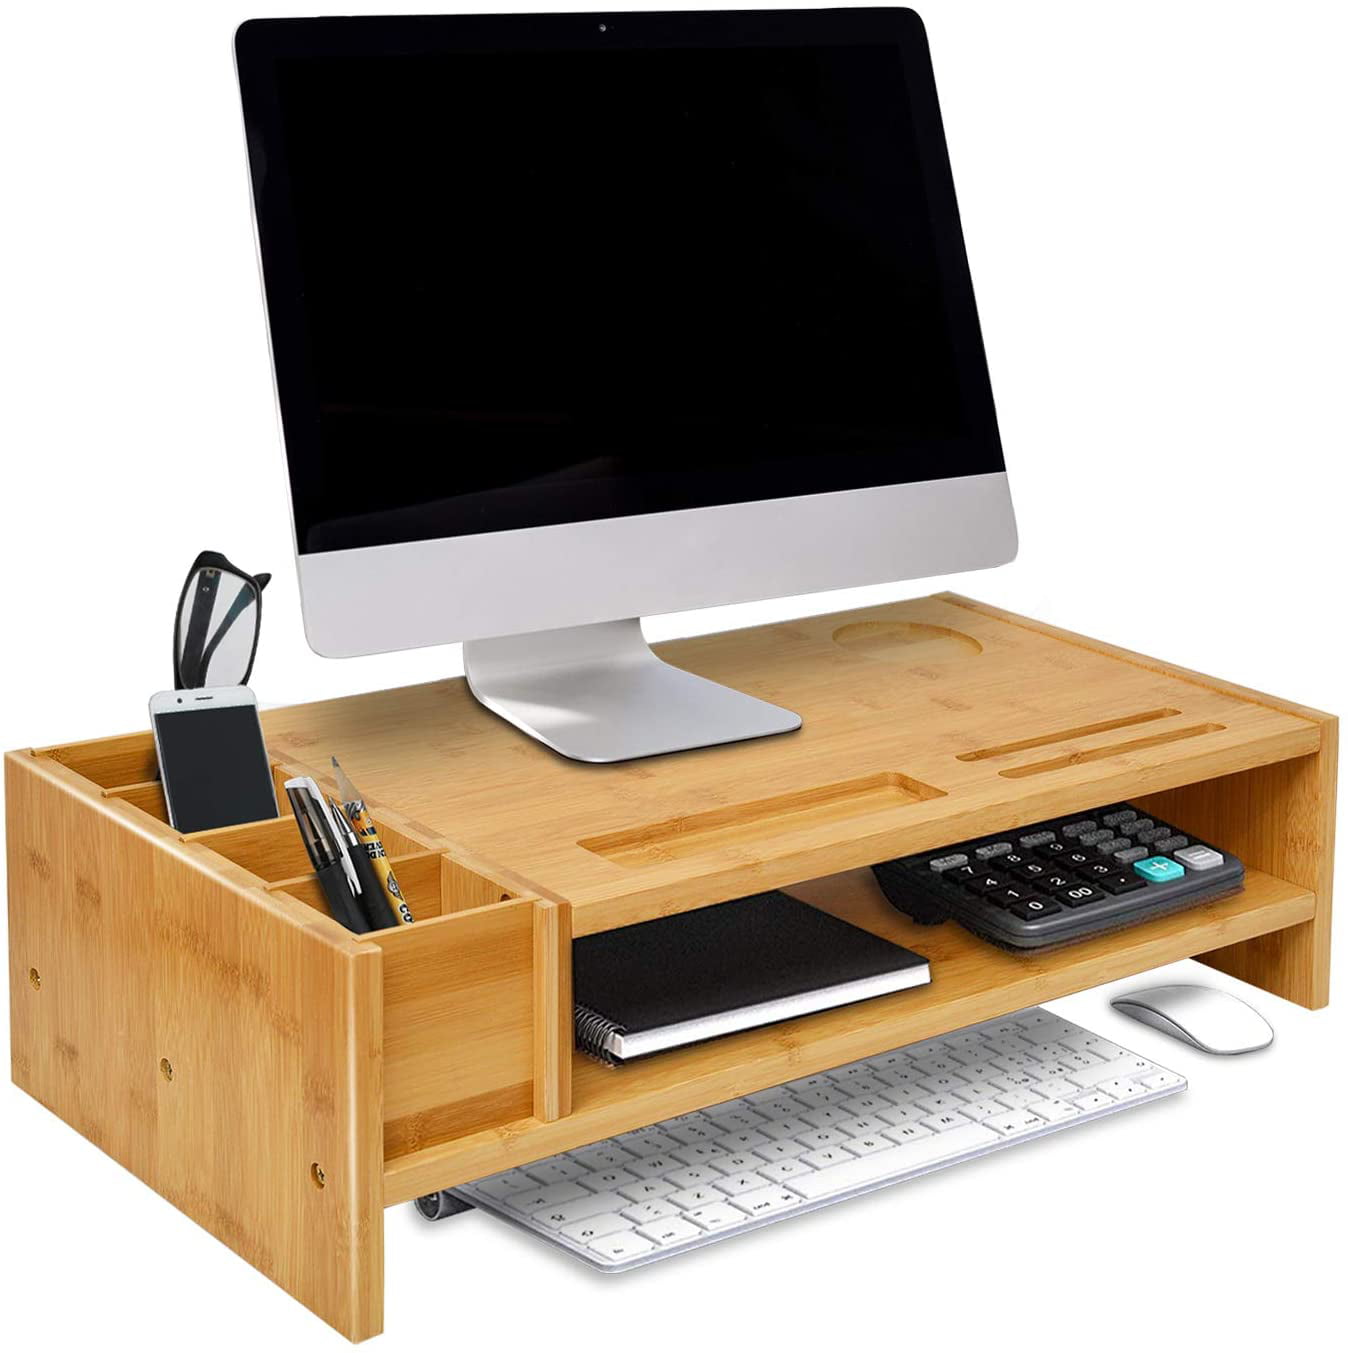 Bamboo Wood Monitor Stand Ergonomic Computer Riser with Storage Organizer Drawers Desktop Laptop Shelf Risers Cellphone Stand for Home